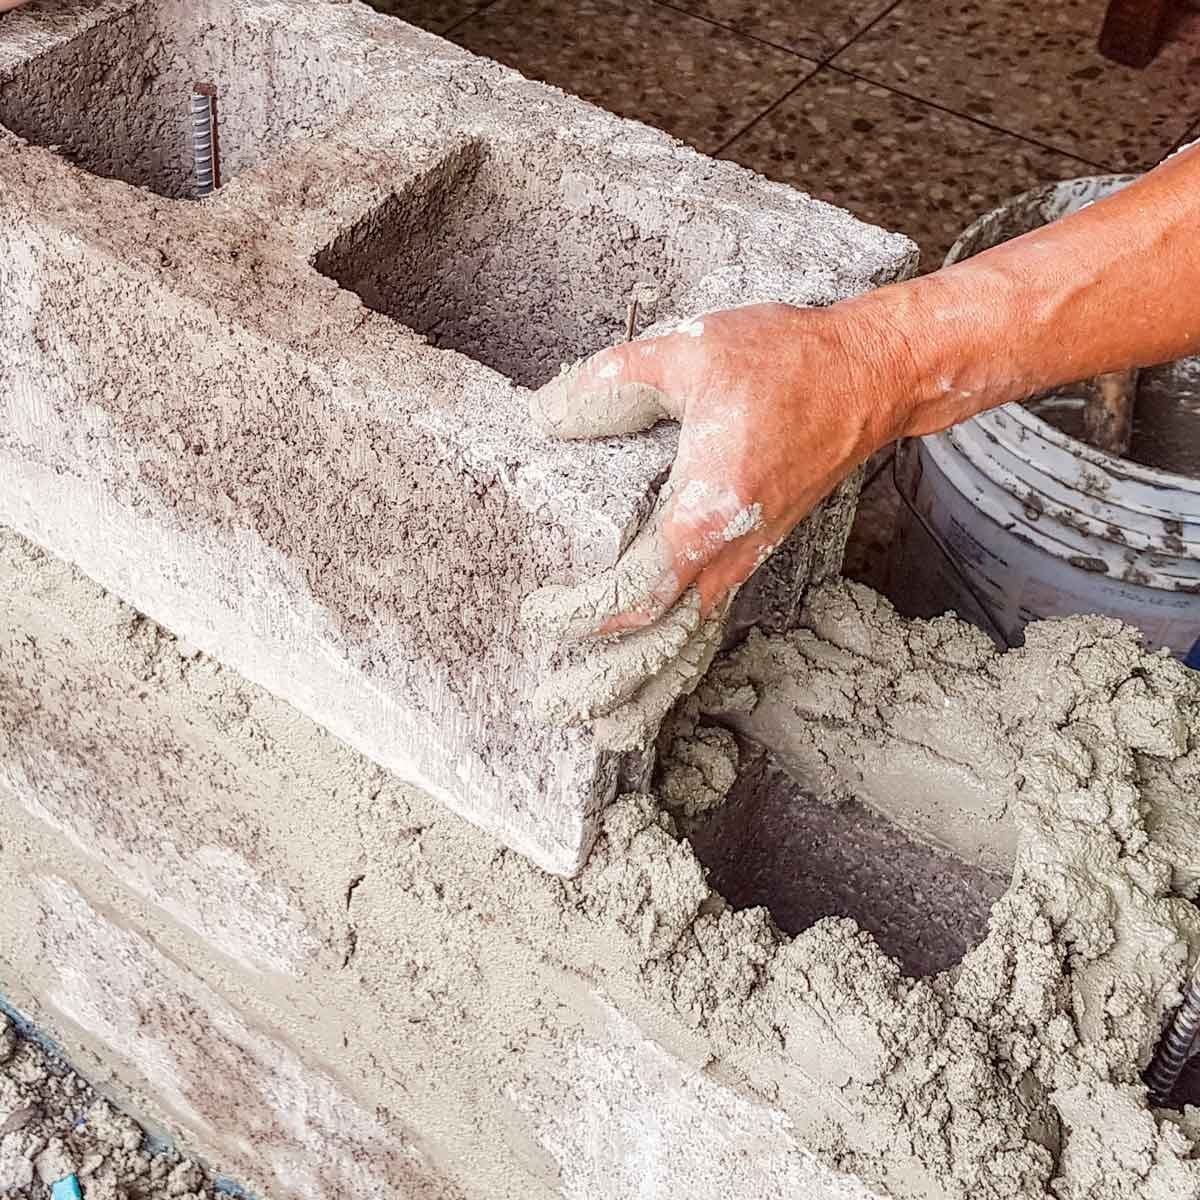 Working with cement with bare hands